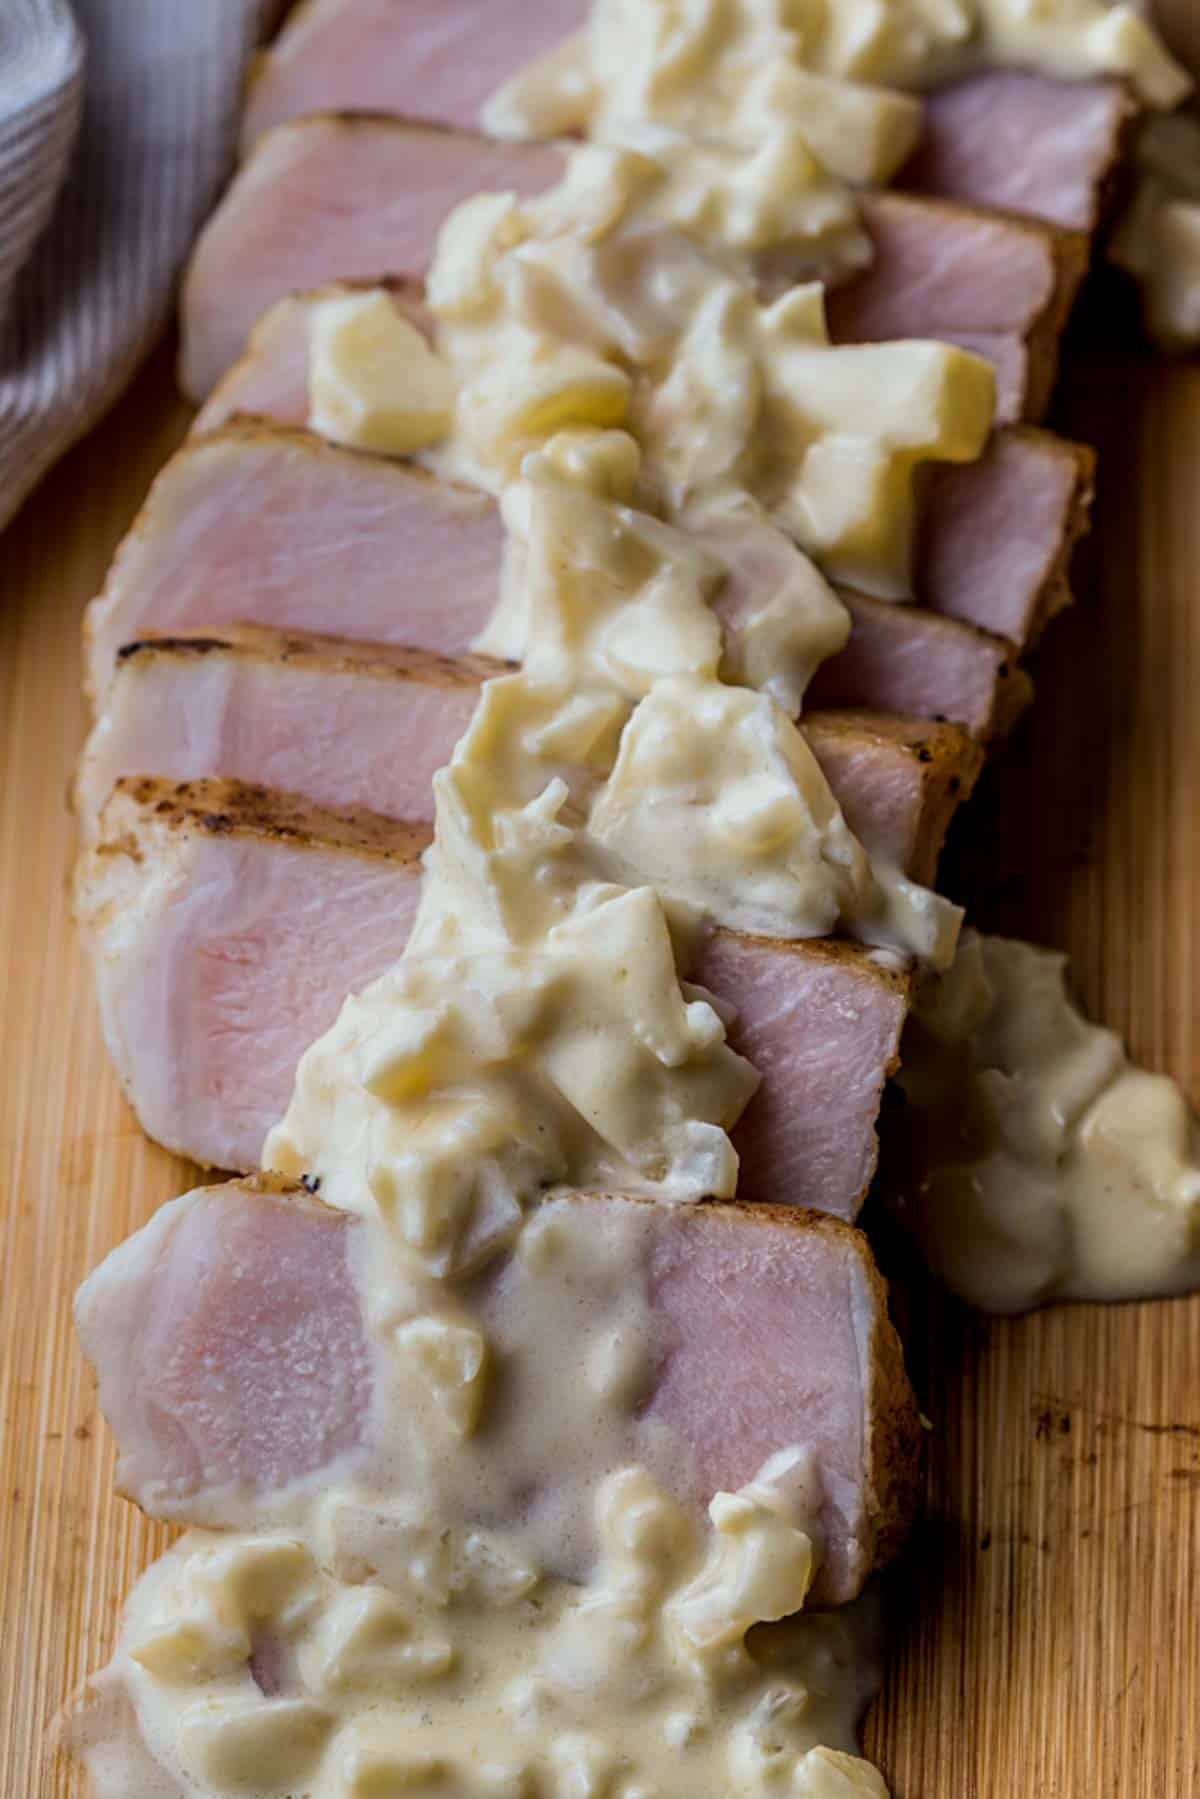 sliced pieces of pork in a chunky white sauce